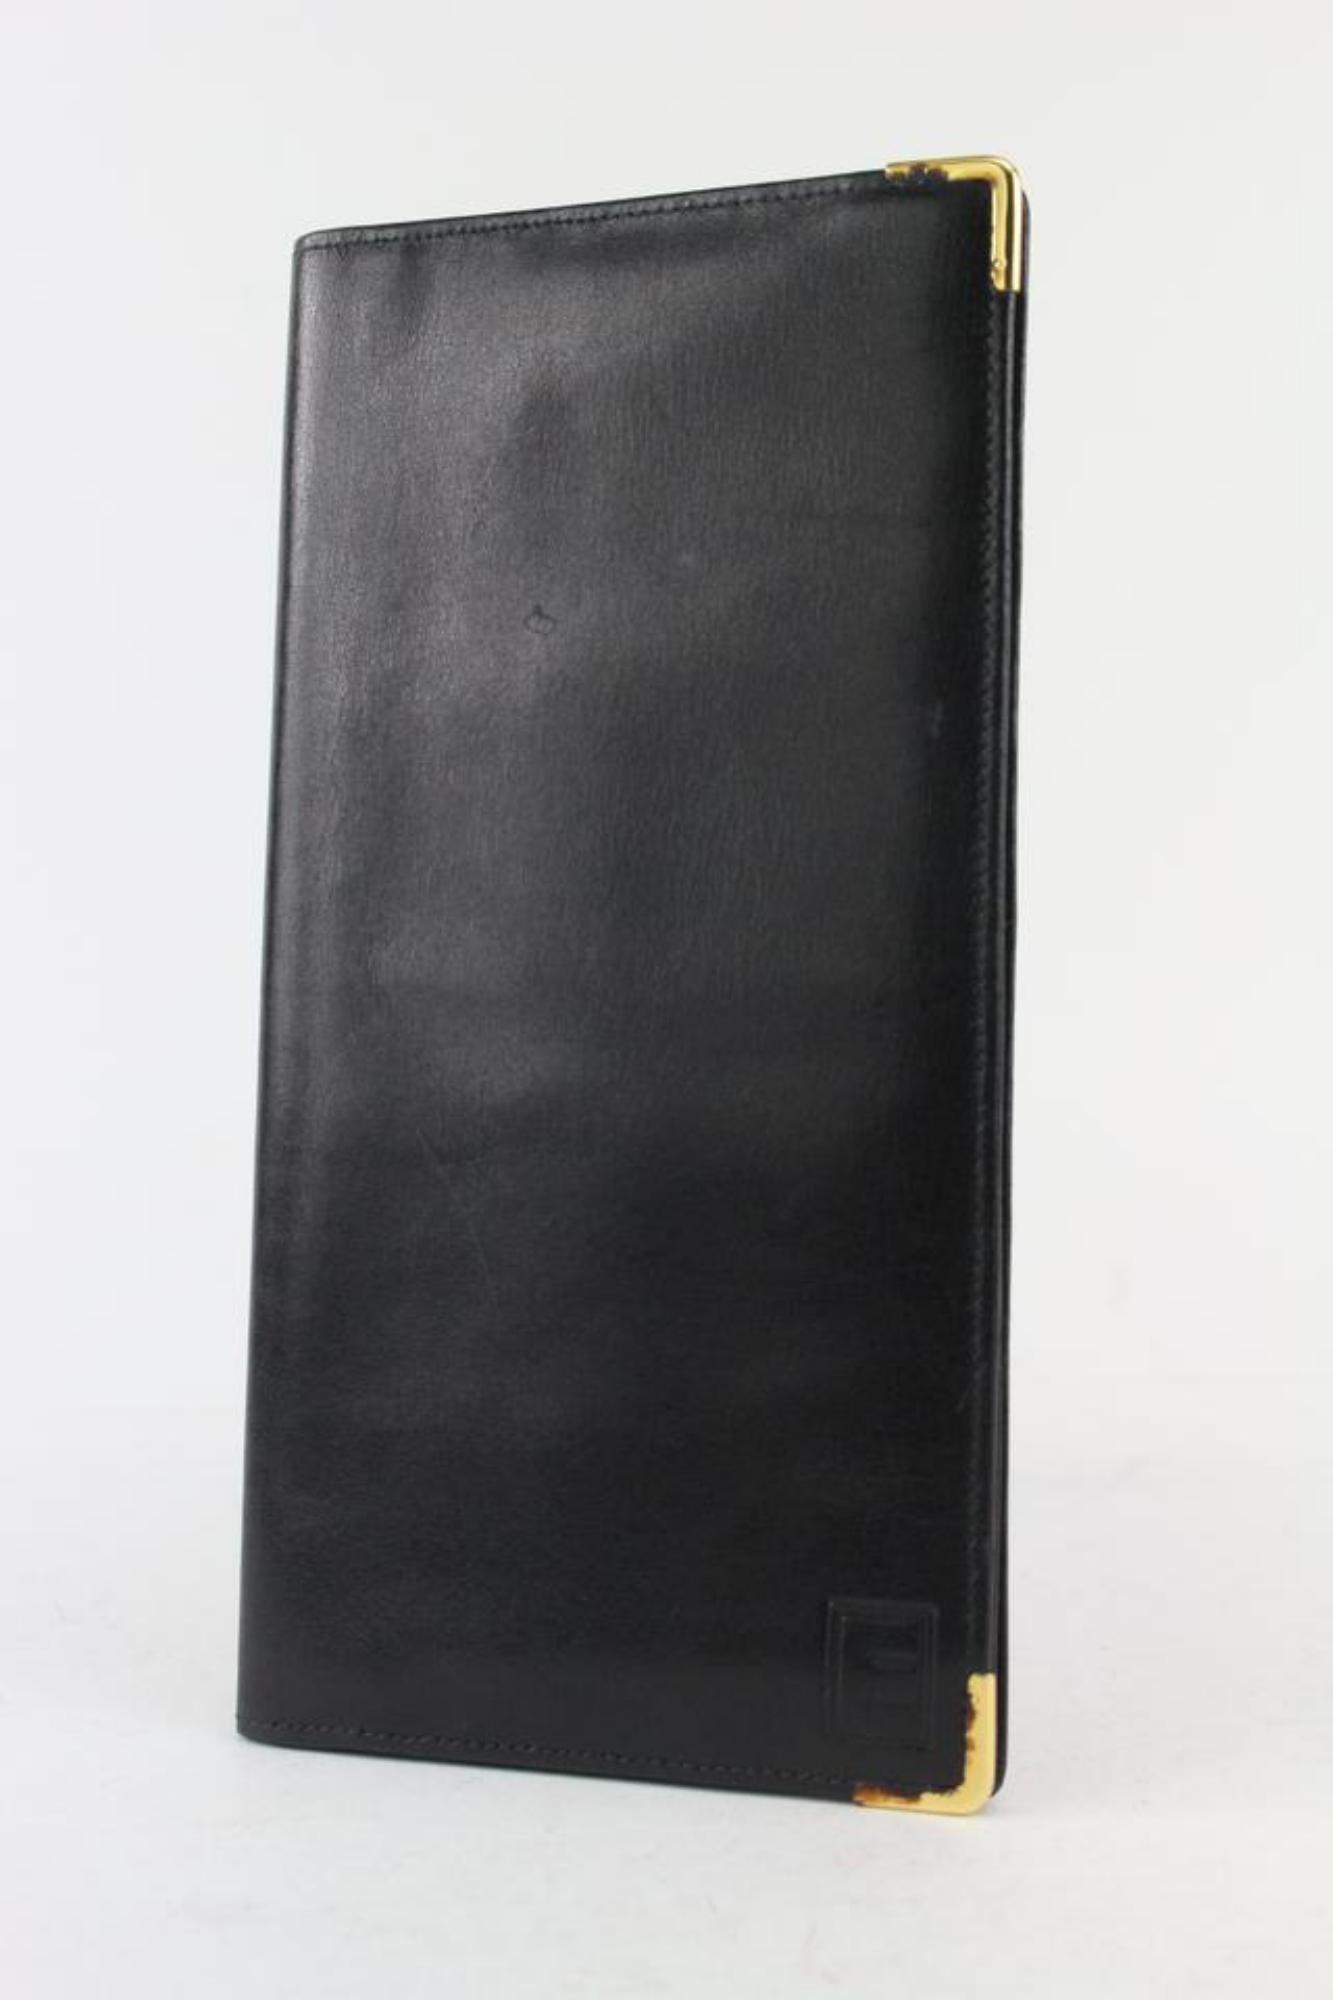 Other Fintex Black Leather Wallet 7F1026
Made In: England
Measurements: Length: 4 